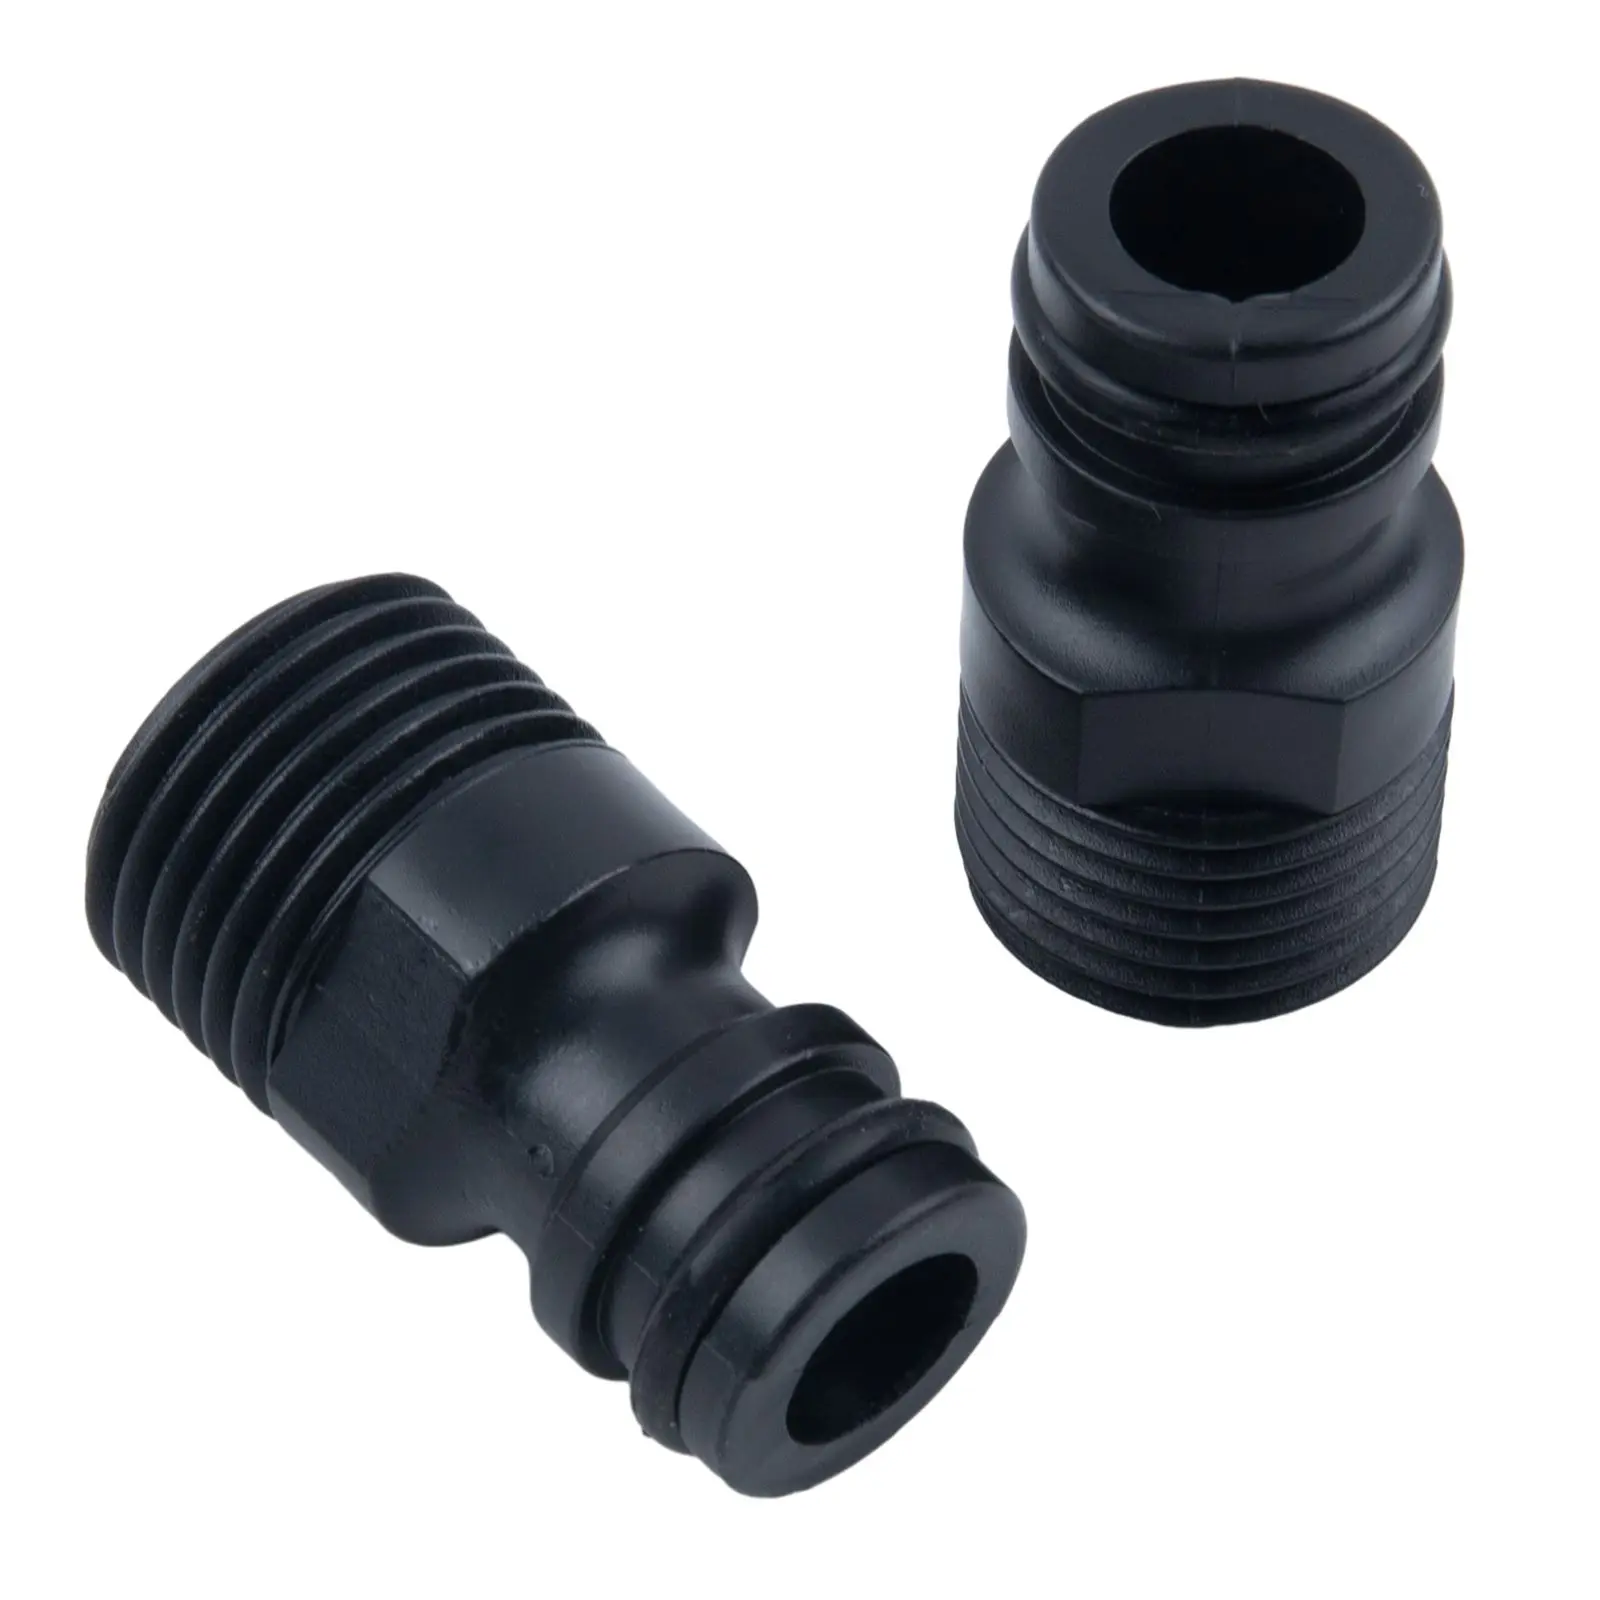 

Garden Tap Adaptor Pipe Connector Nipple Tap Adaptor Outer Nipple Practical Quick Coupler Replacement Threaded Accessories BSP